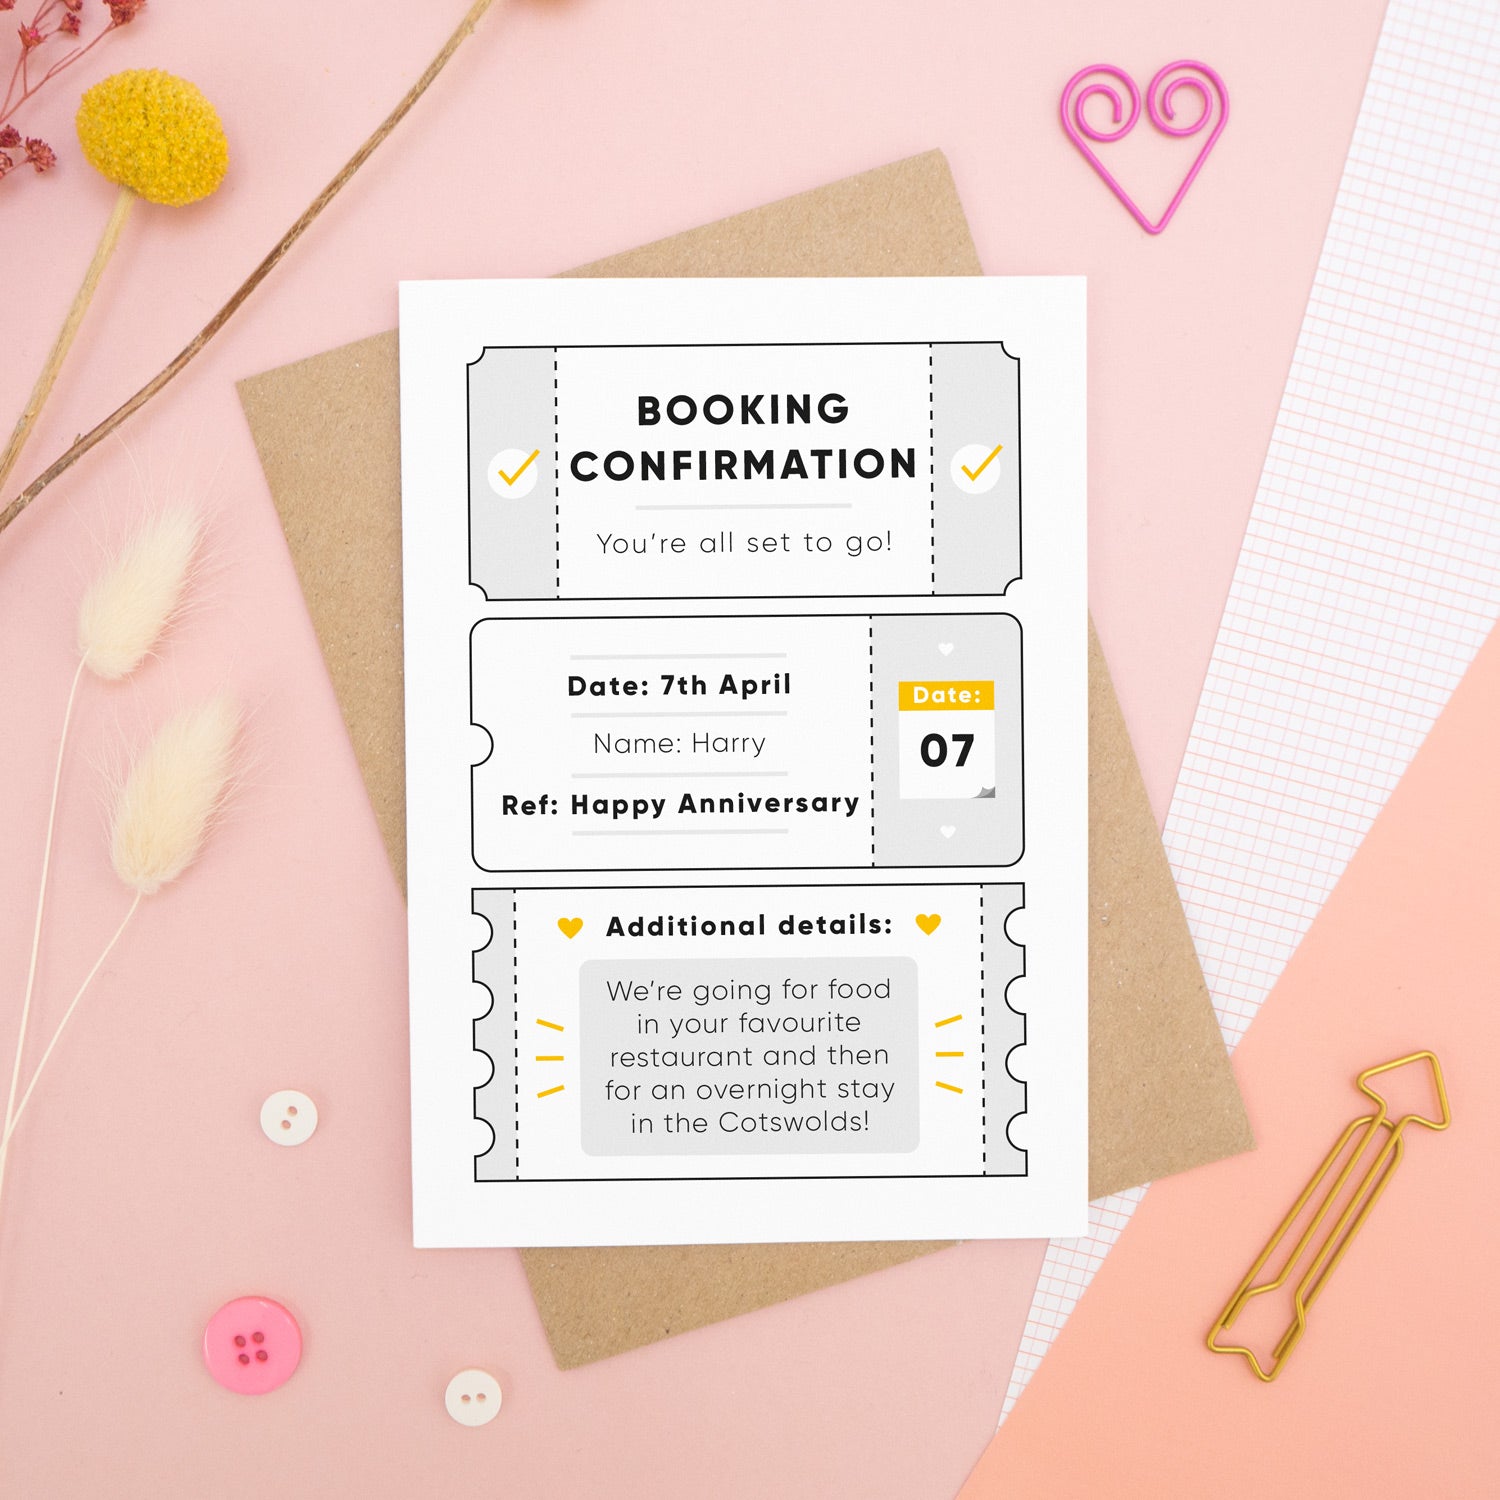 A personalised anniversary booking confirmation gift card lying flat lay on a pink and peach background scattered with dry flowers, grid paper, buttons and a heart. The card is lying on it’s kraft brown envelope and pictured is the grey version of the gift card.